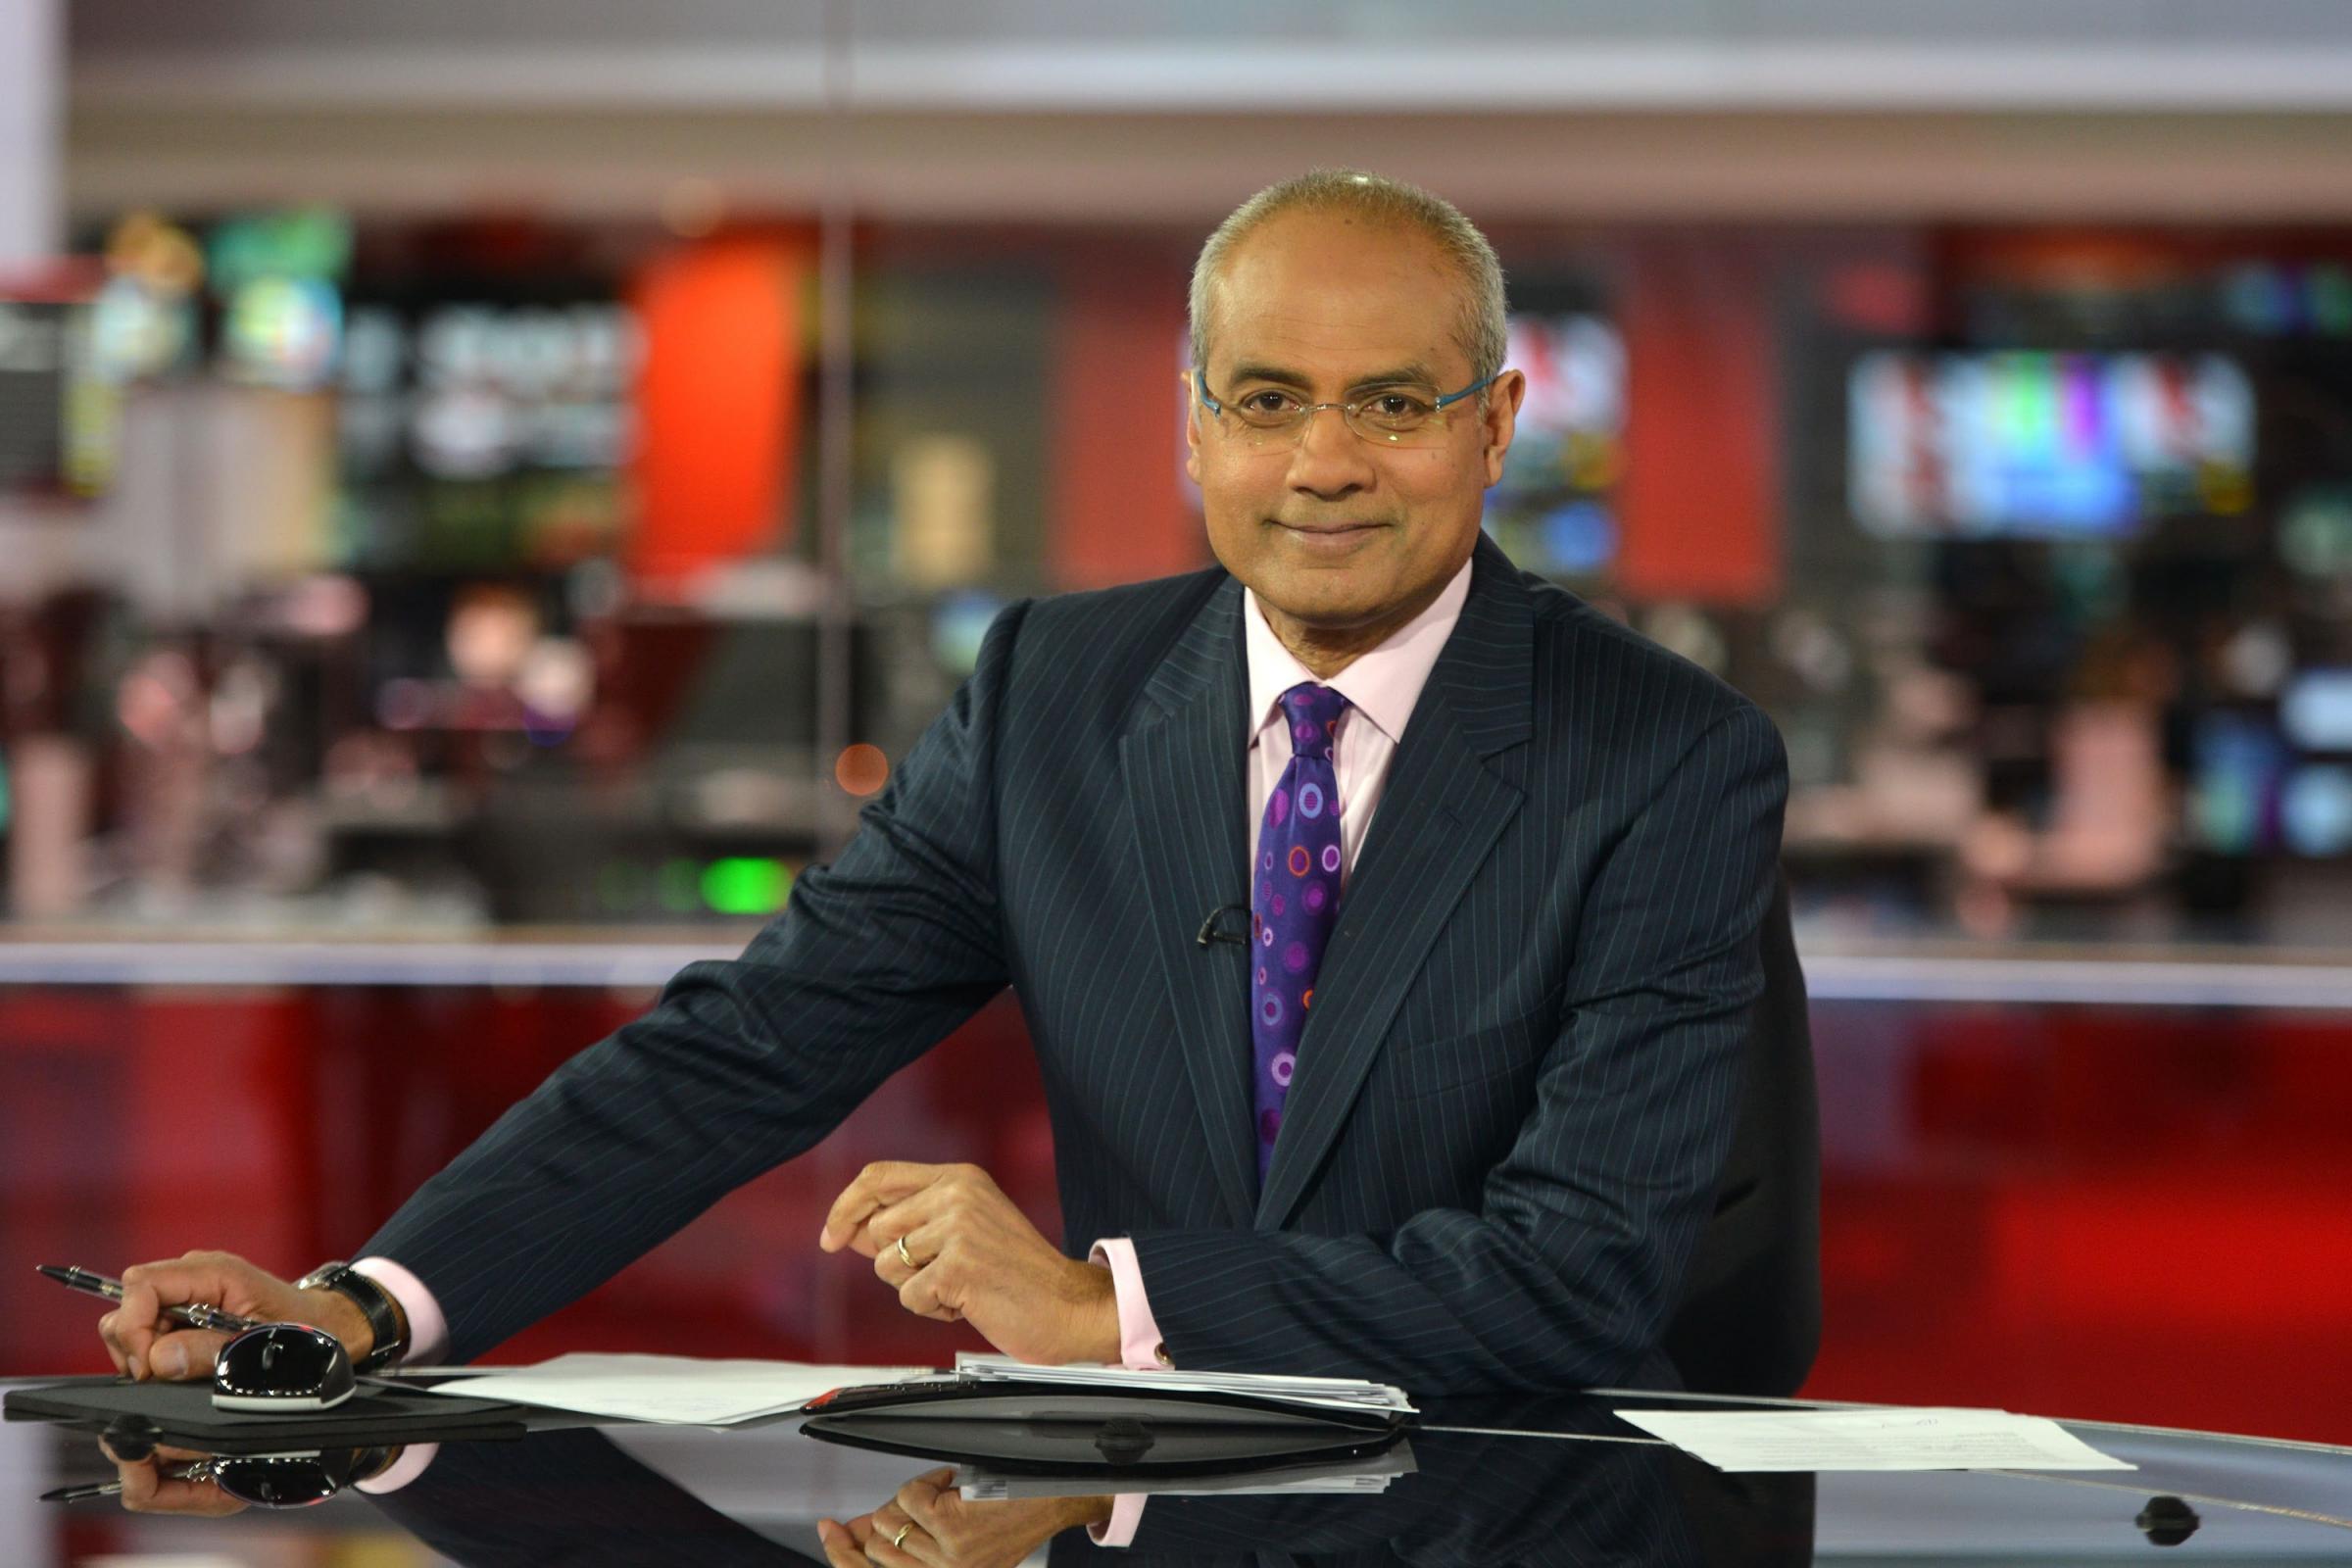 George Alagiah on living with a stoma: I felt guilty using disabled toilets